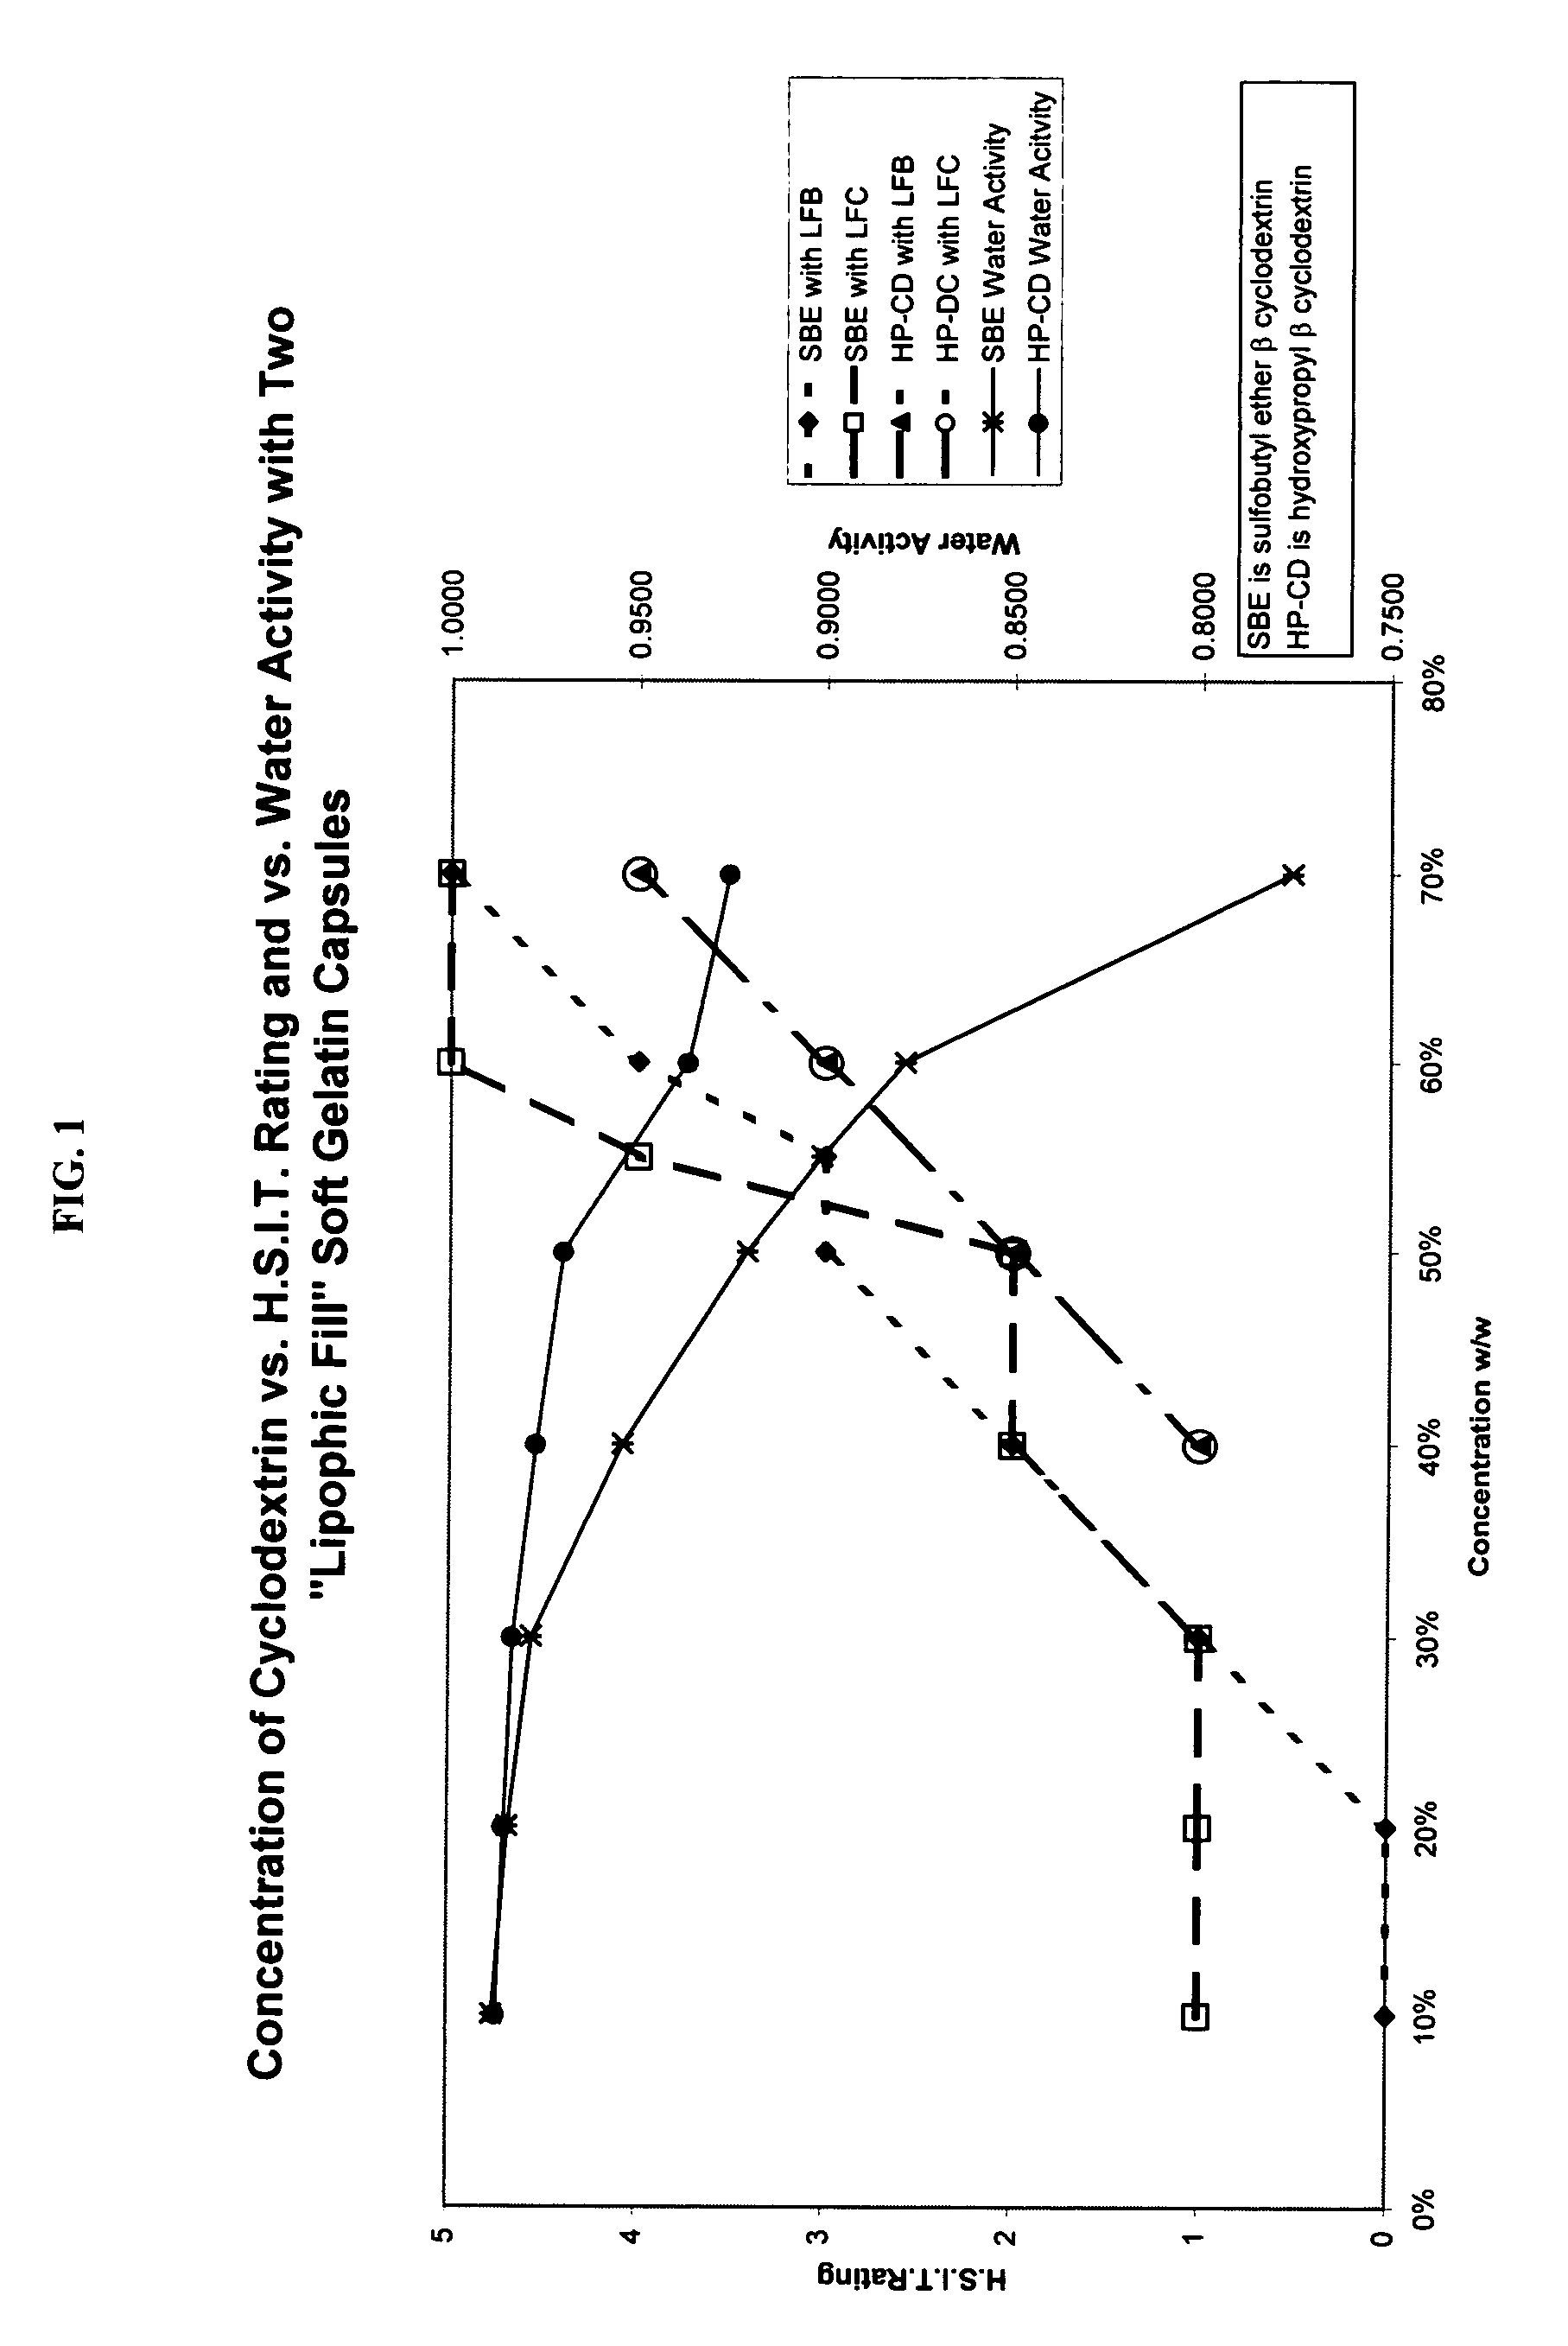 Capsules containing aqueous fill compositions stabilized with derivatized cyclodextrin